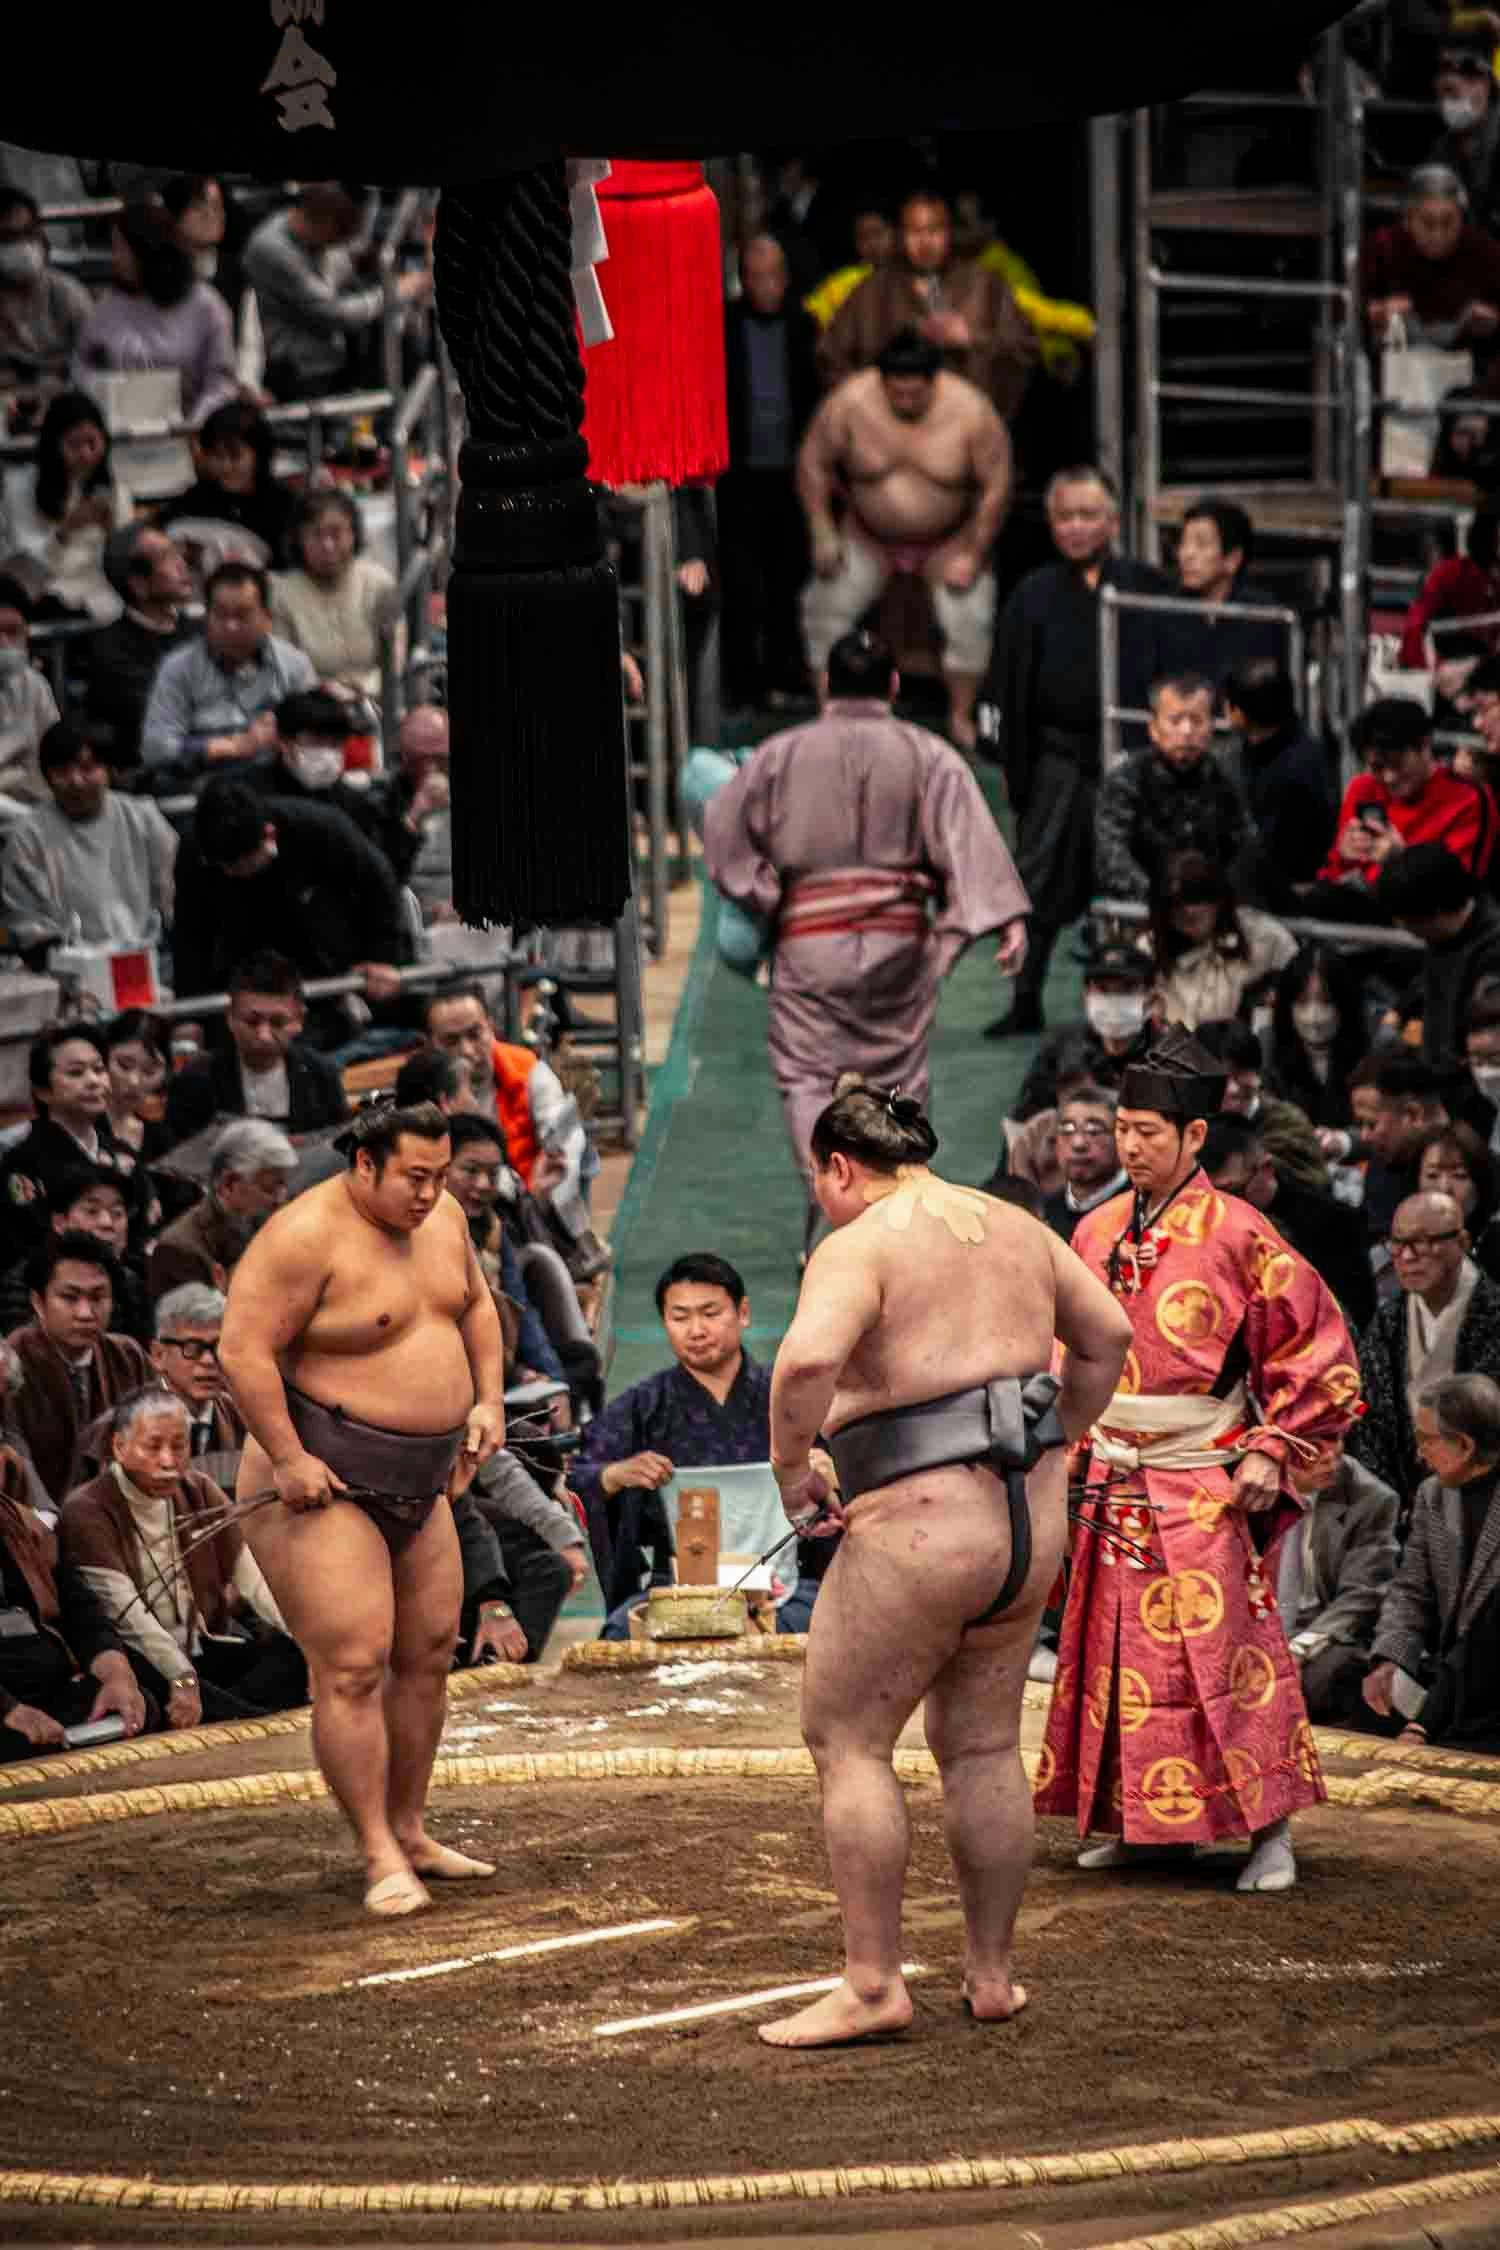 The start of a sumo match. Photo source: James Saunders-Wyndham